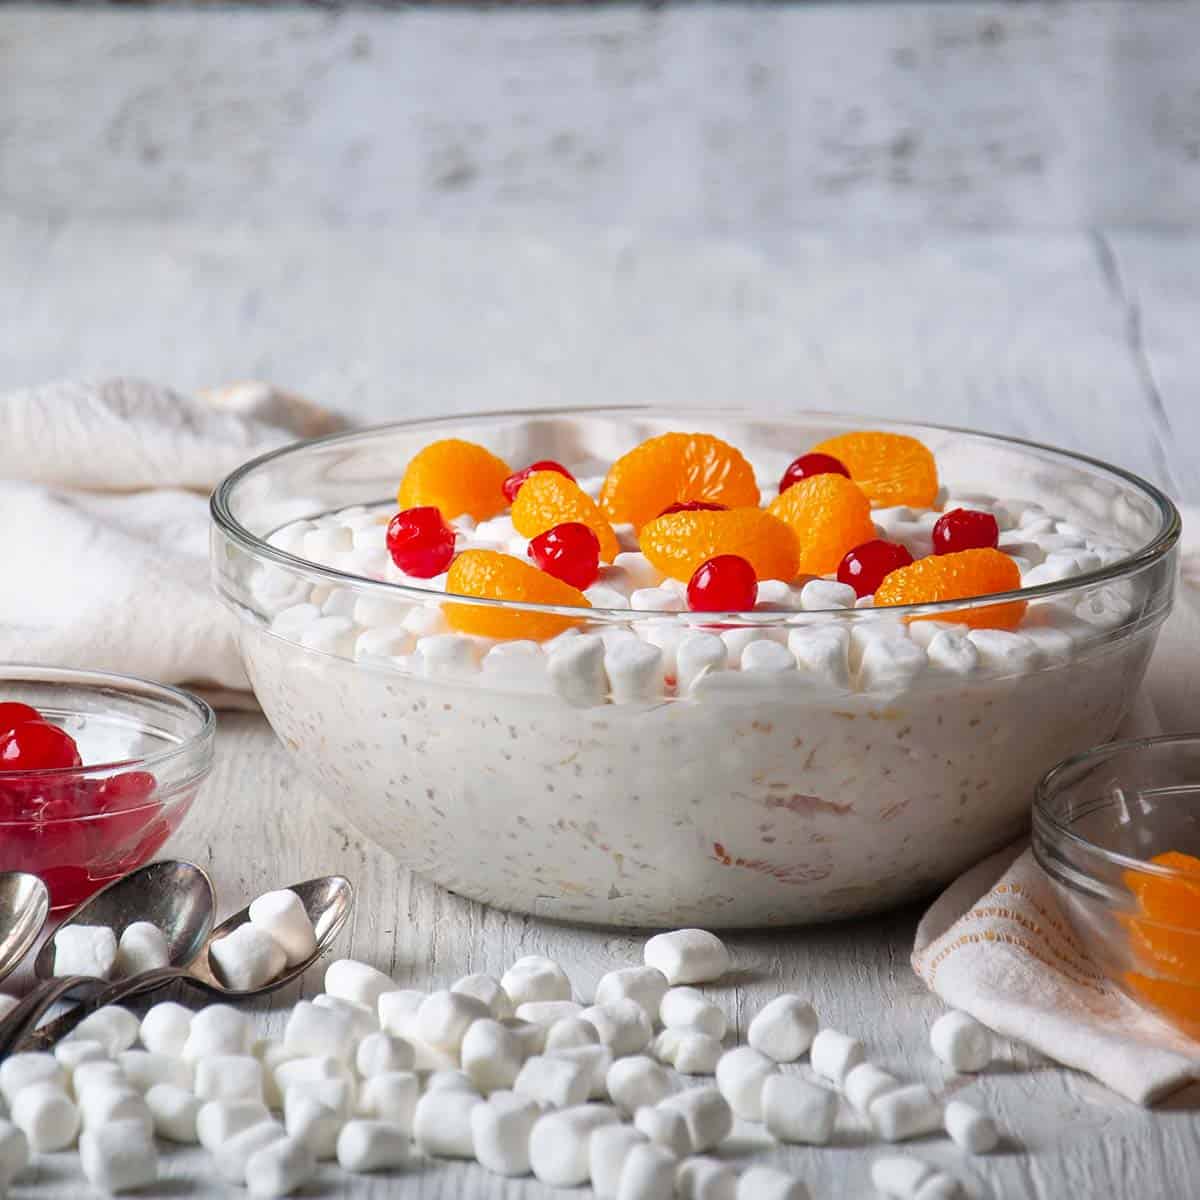 Large bowl of frog-eye salad with marshmallows, cherries, and tangerine segments on the side.